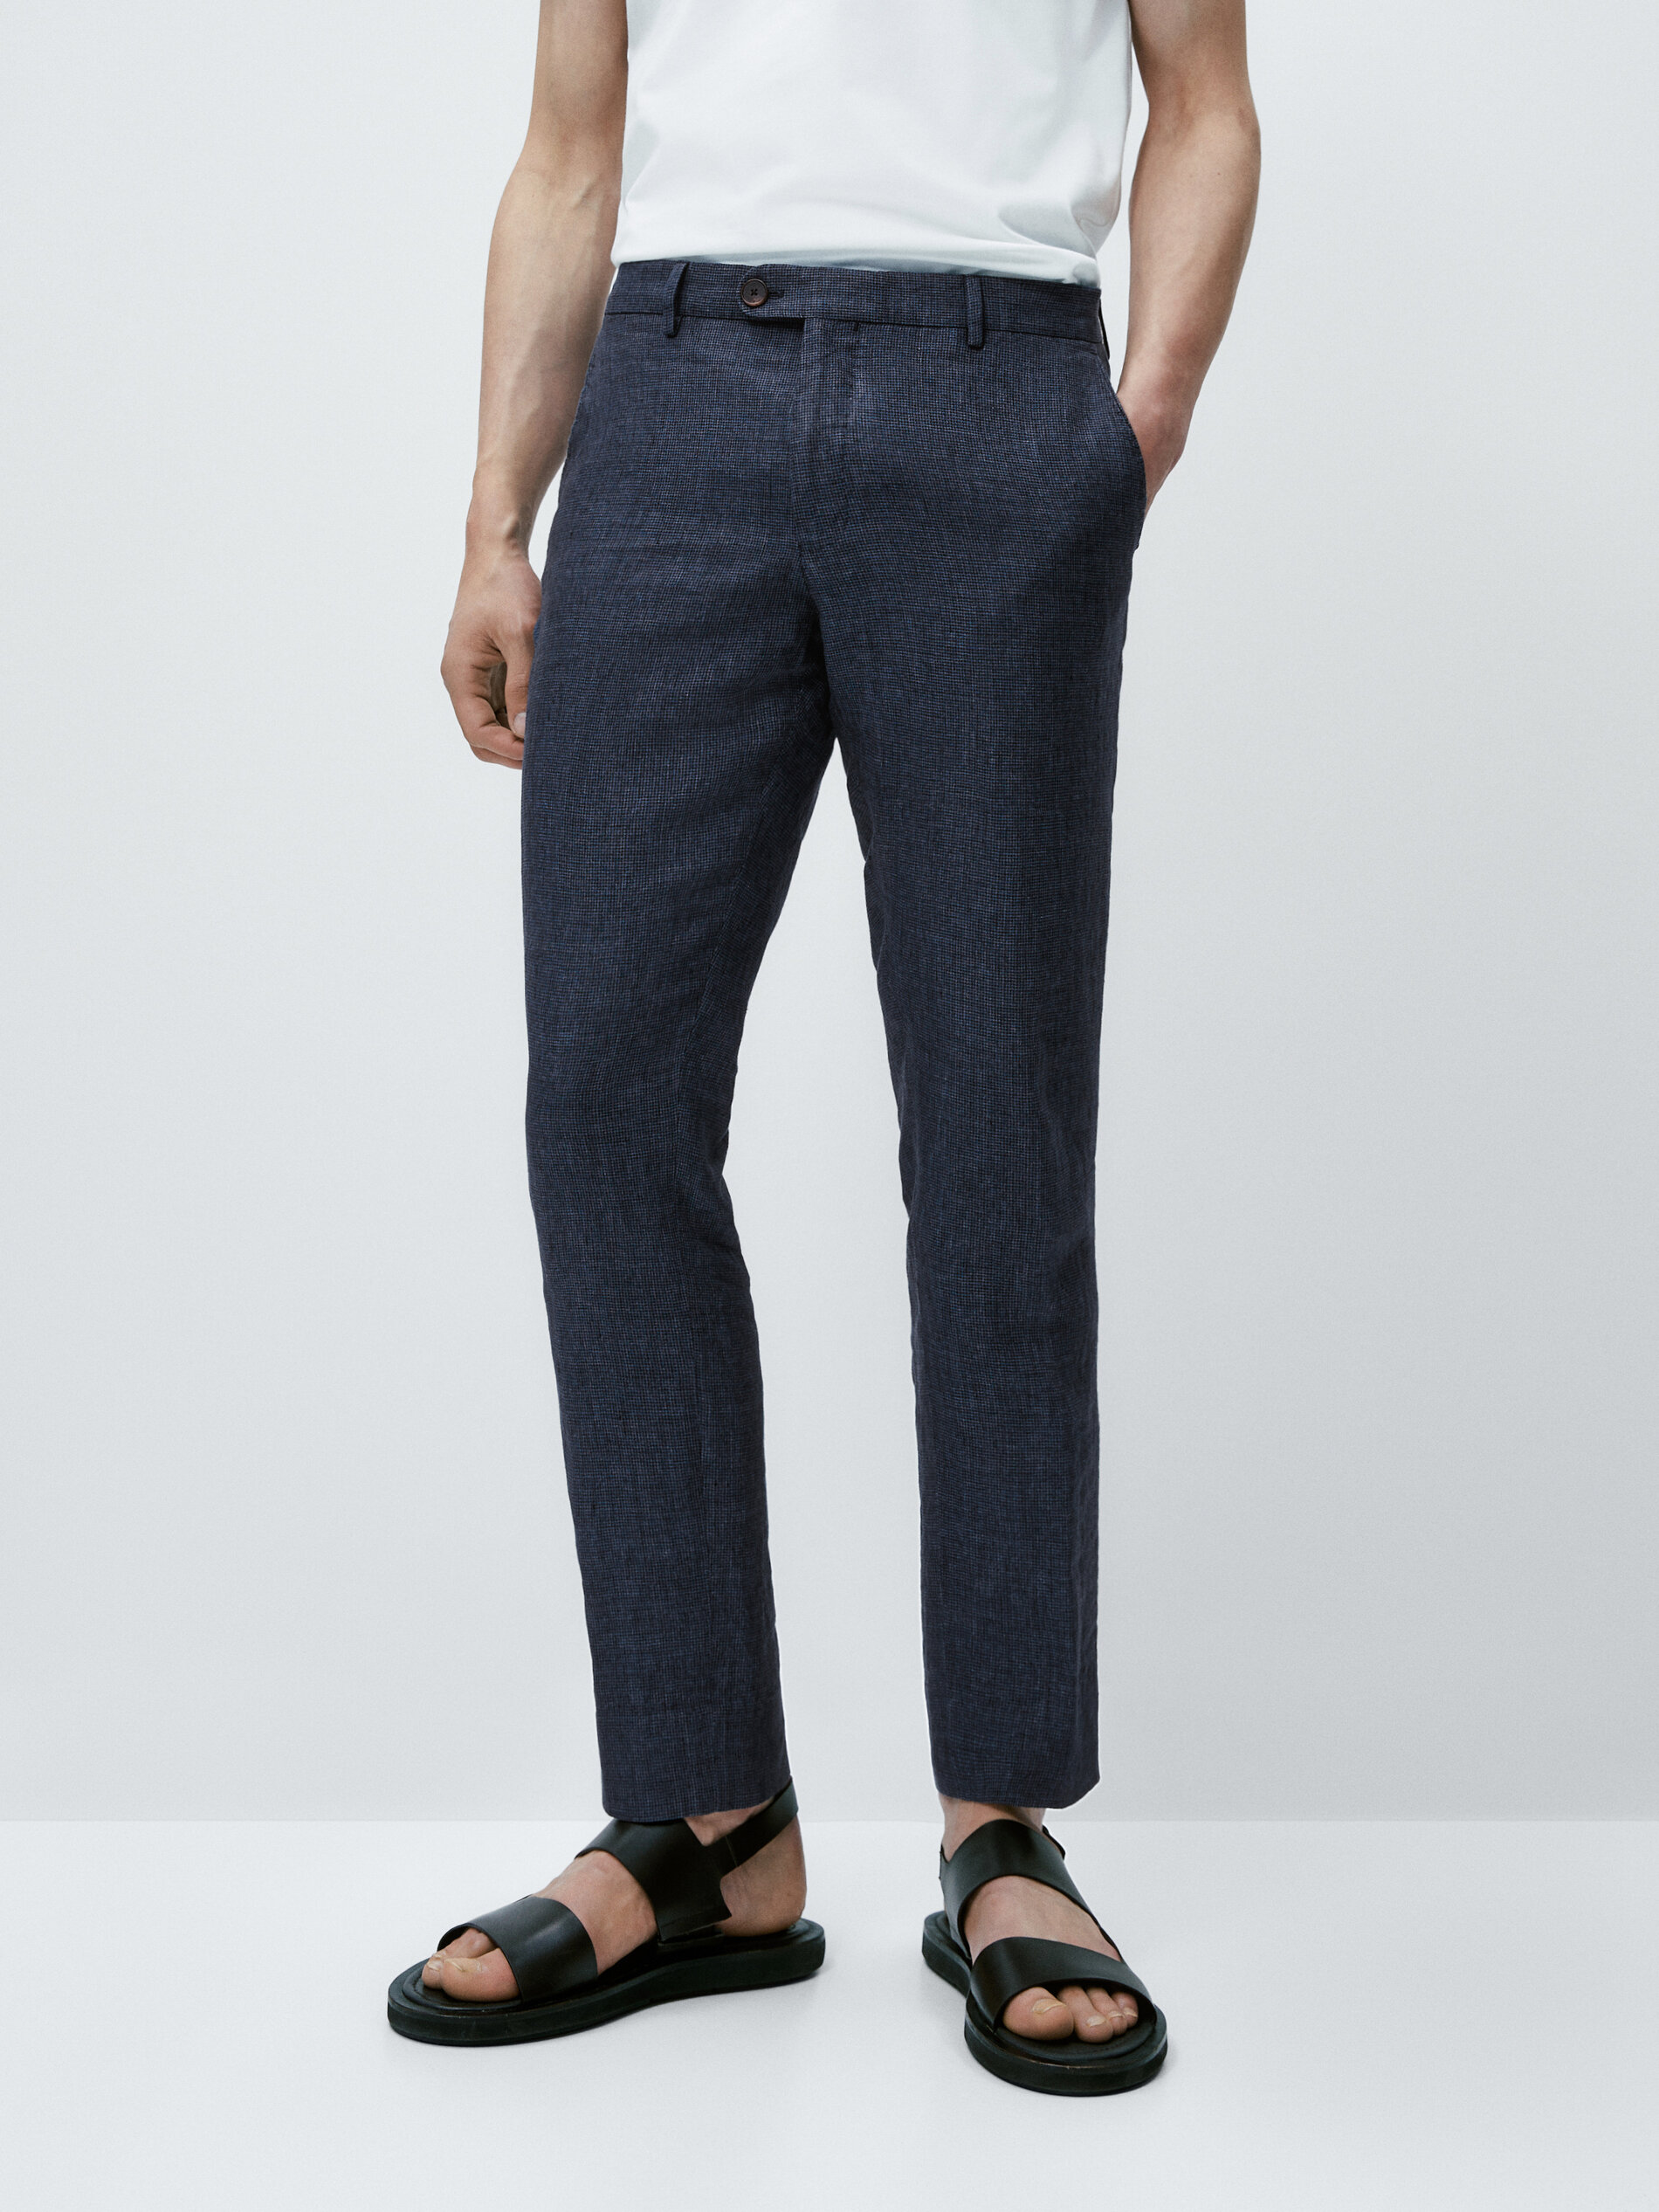 Massimo Dutti Checked WideLeg Trousers in Grey  Grey pants outfit  Checked trousers outfit Grey trousers outfit women